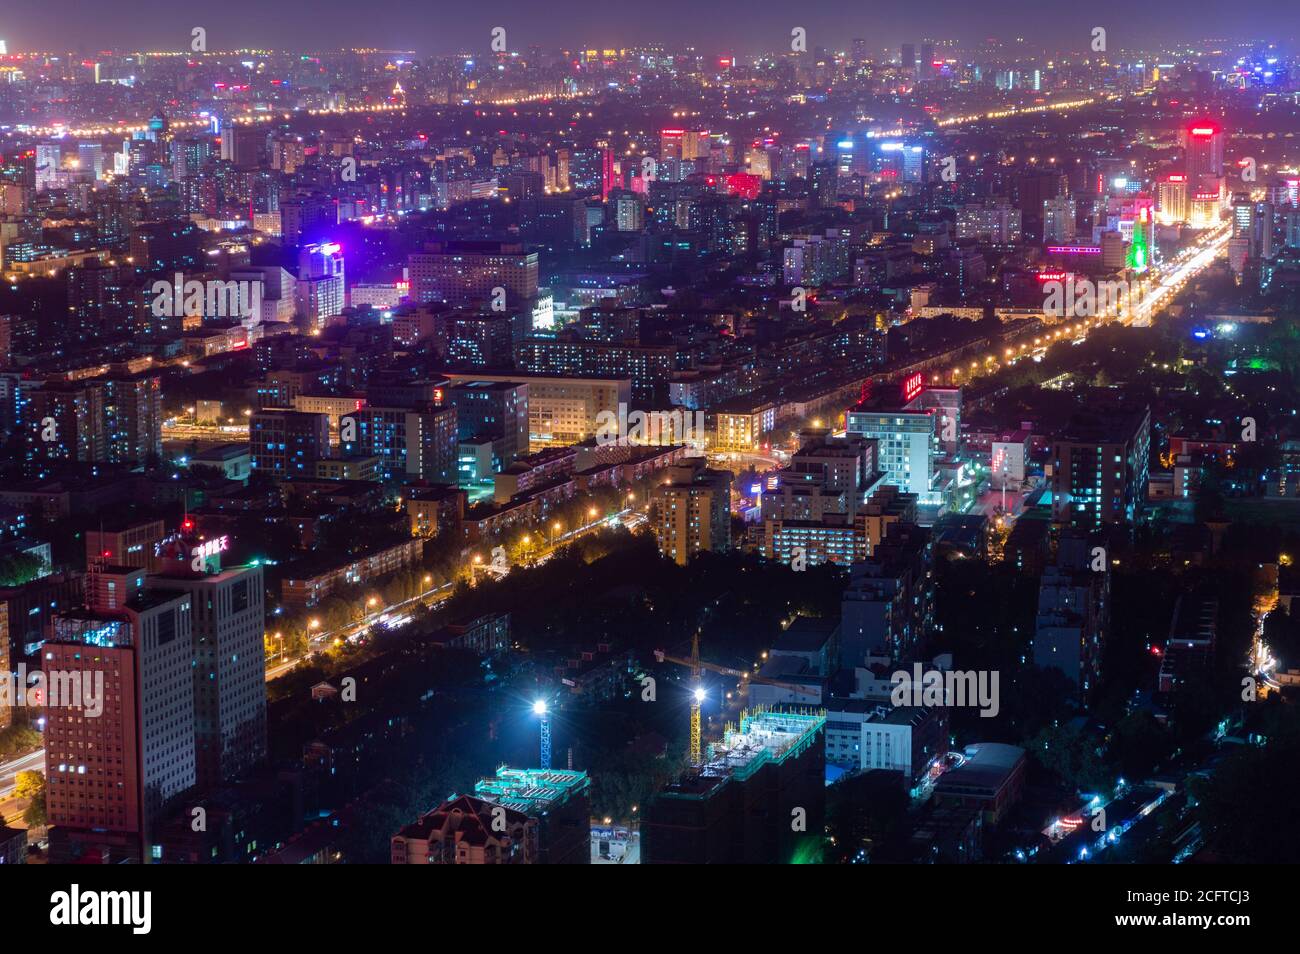 Beijing / China - August 25, 2014: Panoramic night view of Beijing cityscape, view from Central Television Tower observation platform Stock Photo